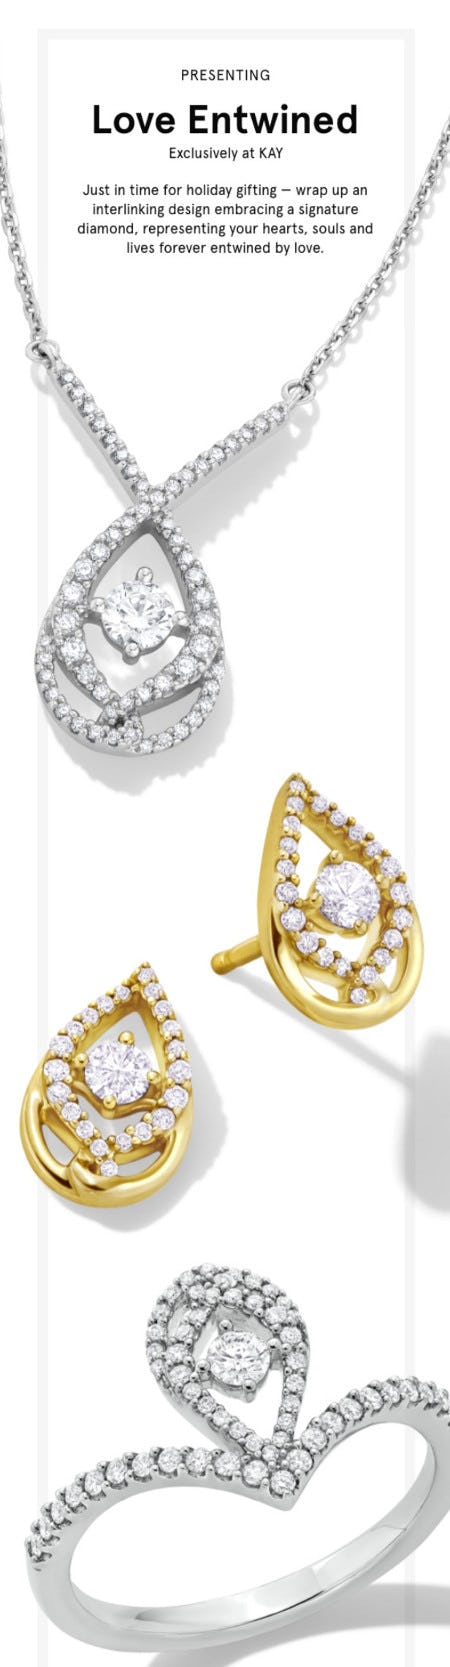 Our New, Exclusive Collection Is Designed for Your Love from Kay Jewelers